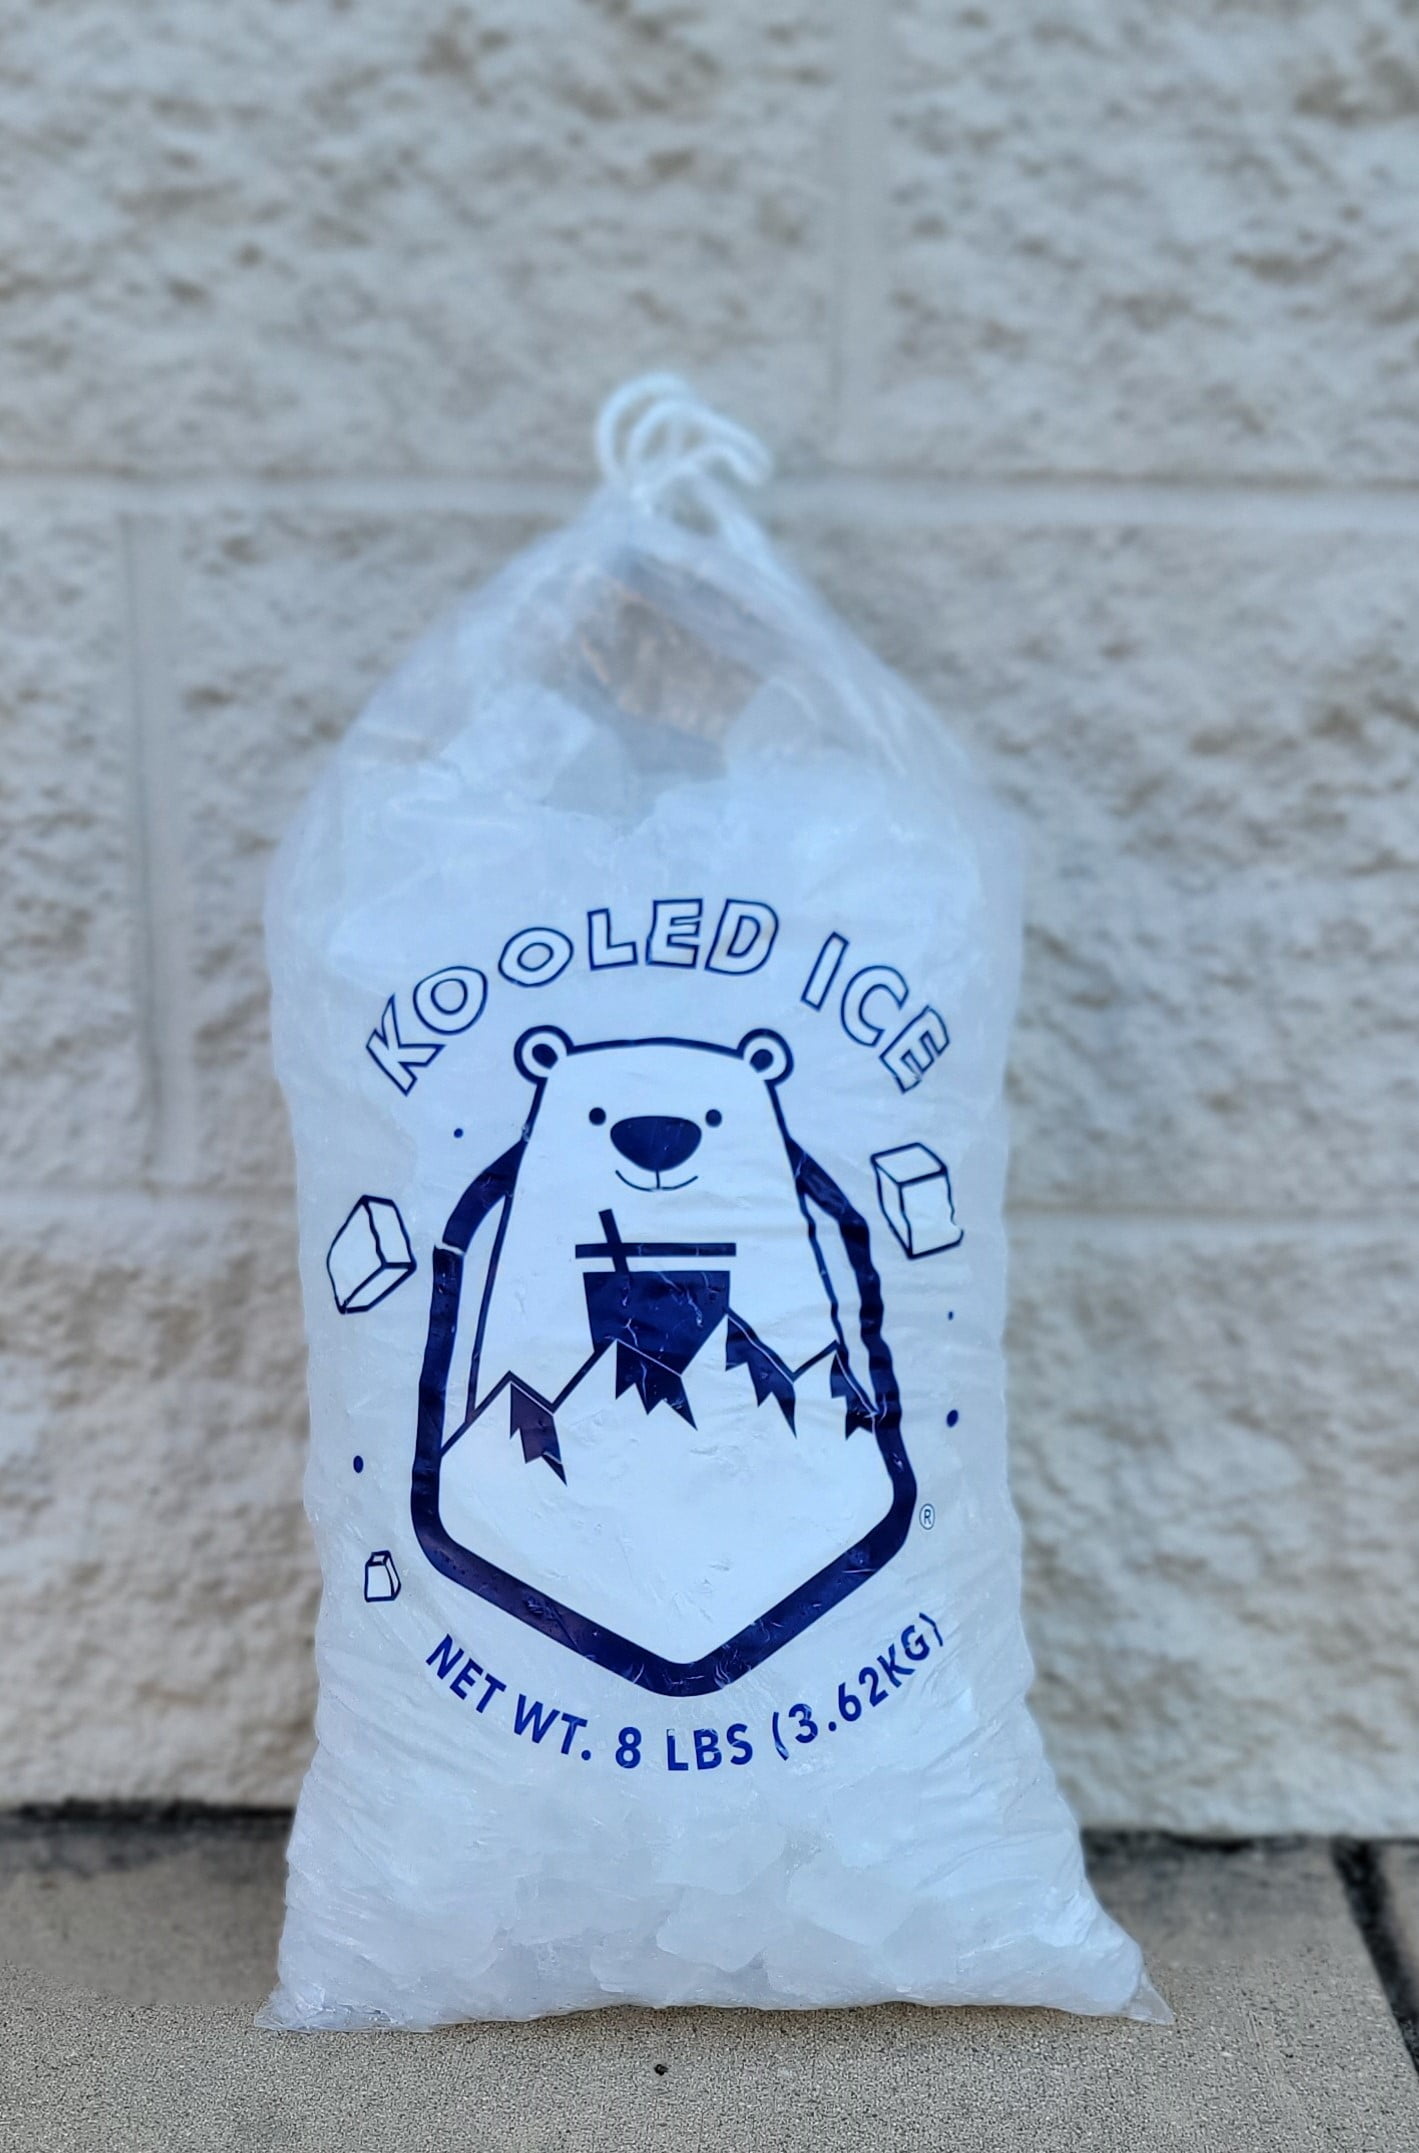 Heavy Duty Ice Poly Bags 3 mil (50 lb)